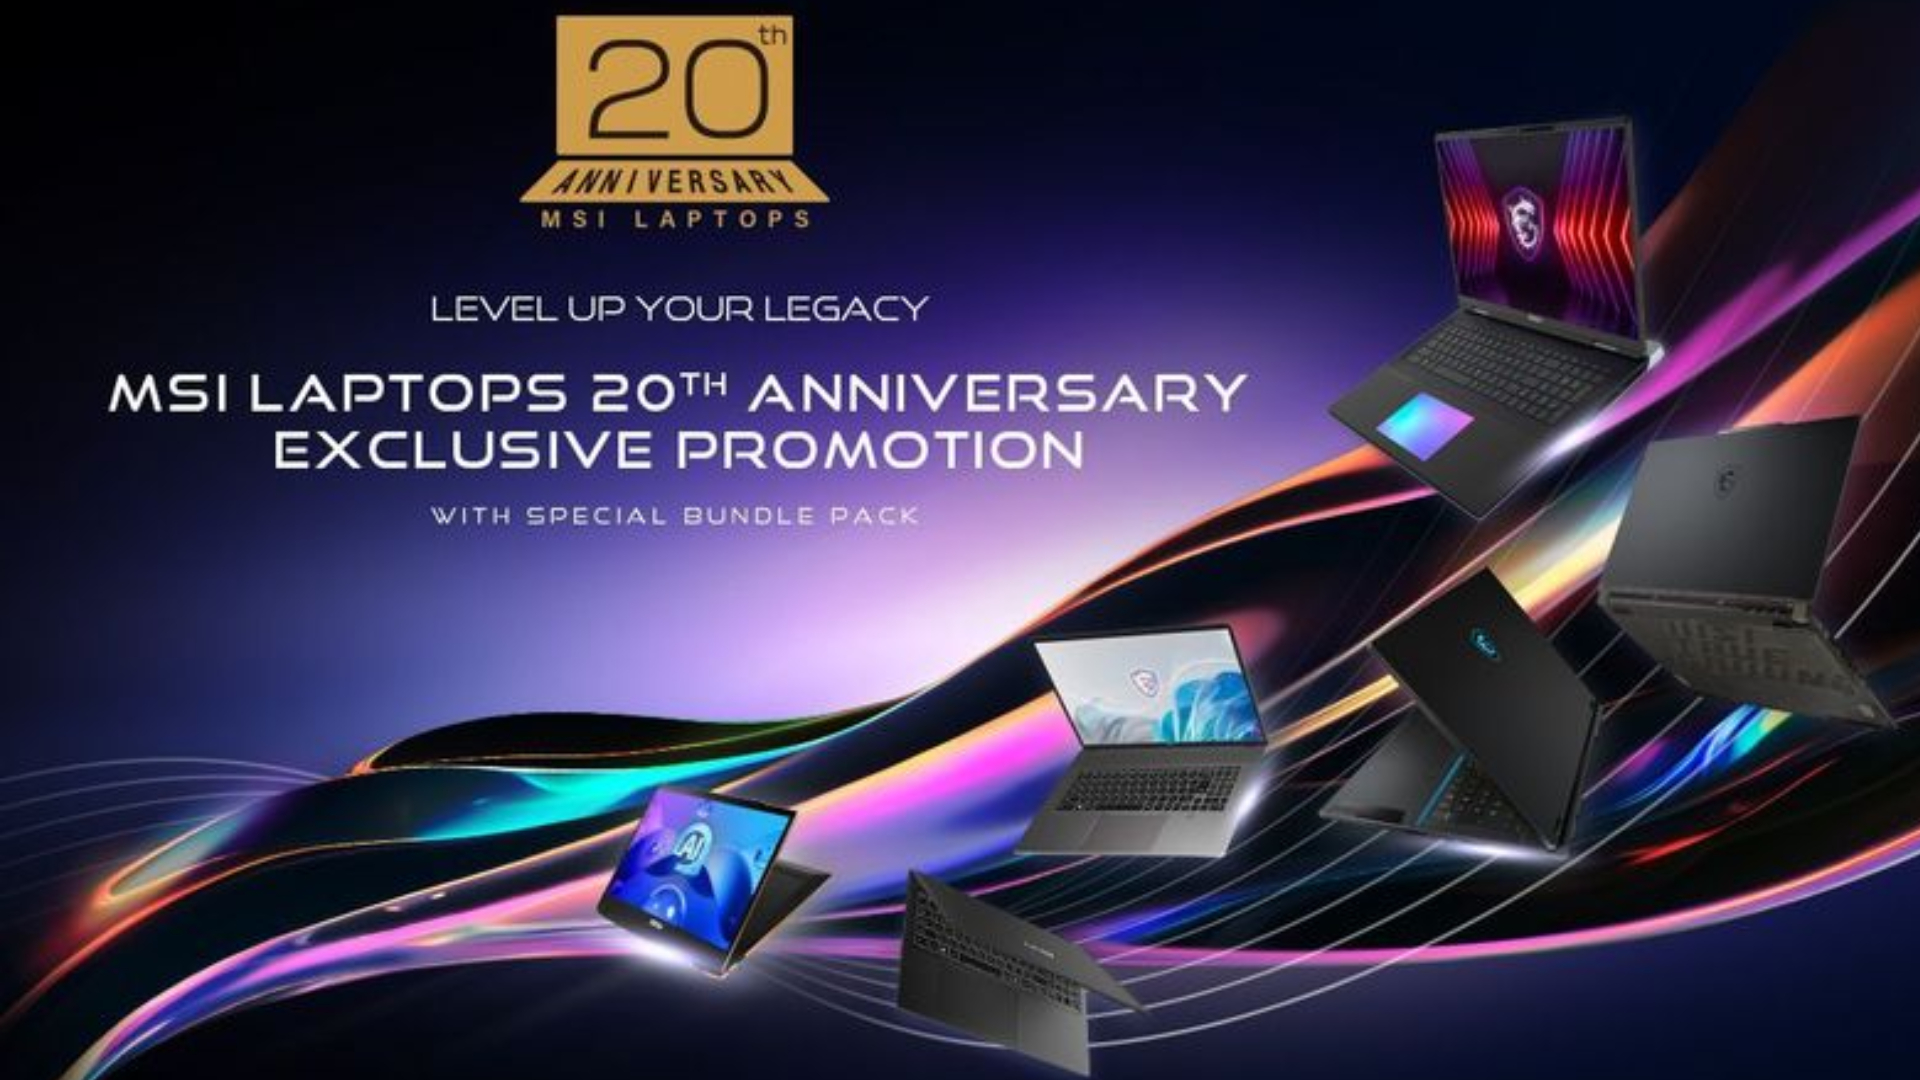  MSI is celebrating the 20th anniversary of its first laptop in London 